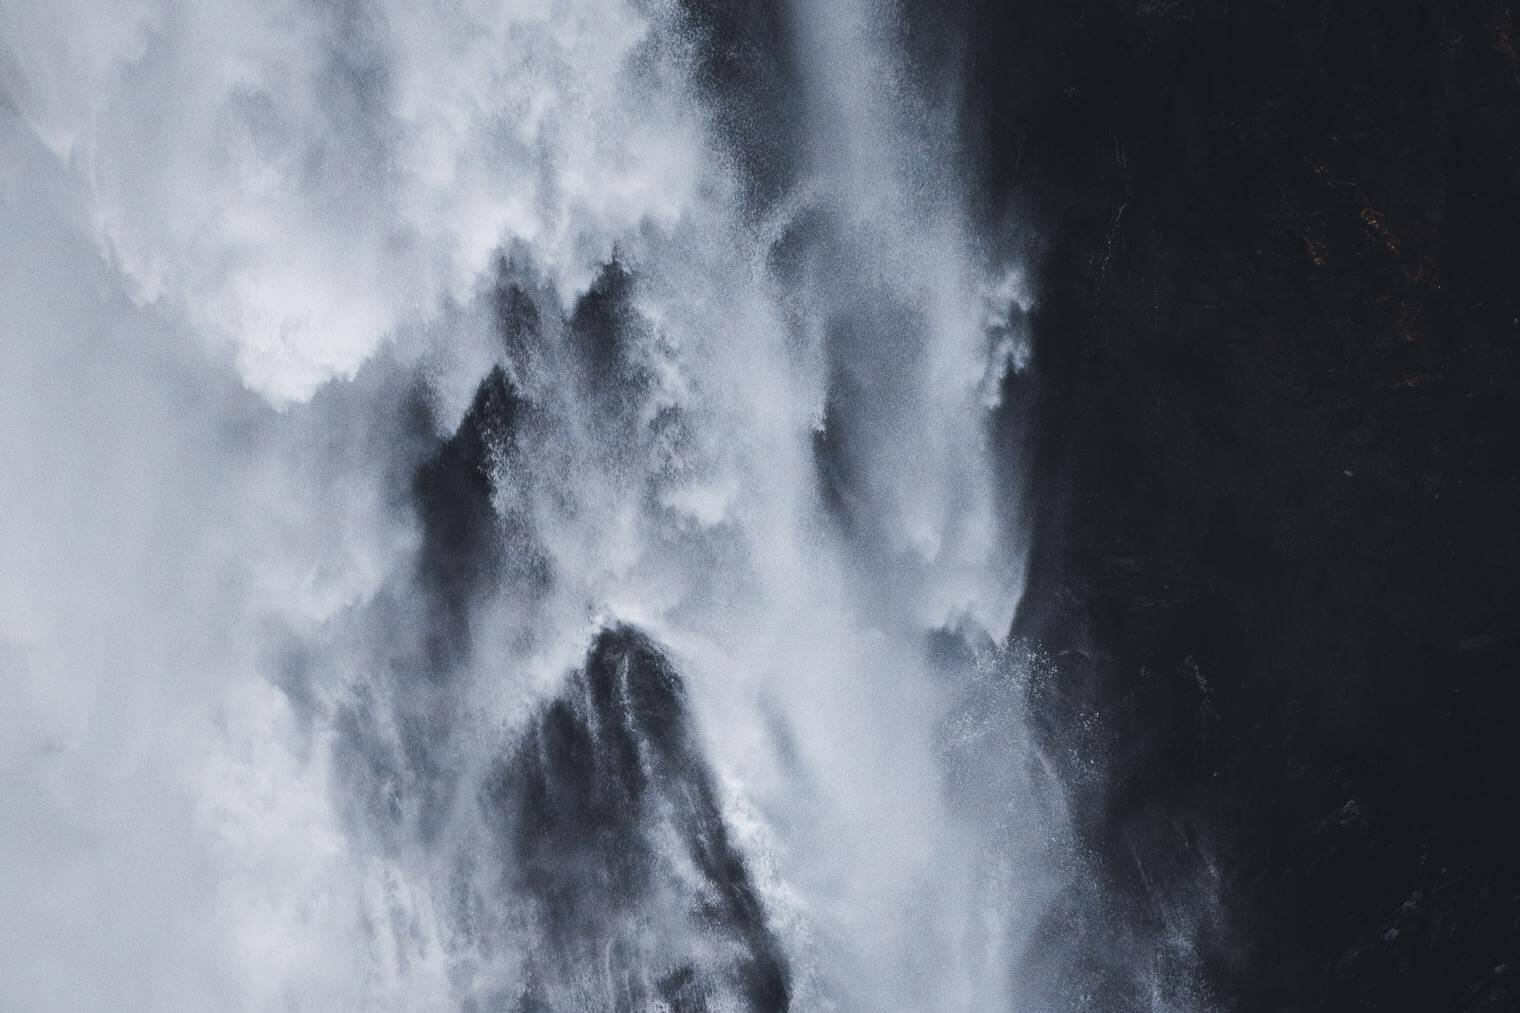 Abstract Waterfall (Lightroom Presets for Visual Art)